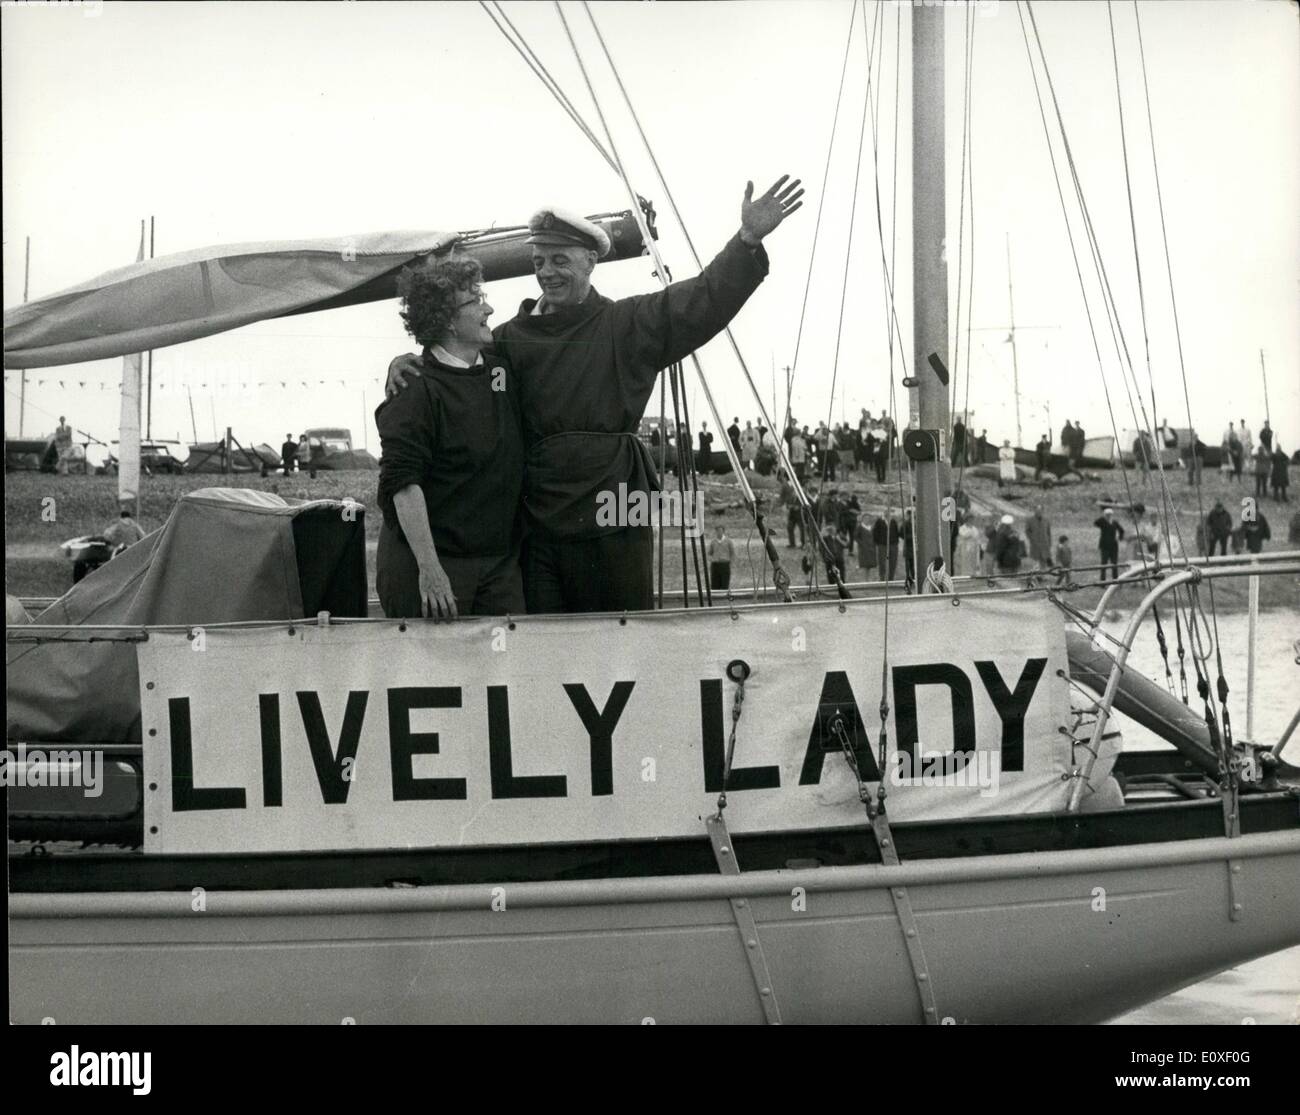 Aug. 08, 1966 - Lone yachtsman sets off on race round world. Mr. Alec Rosy, 58, a Portsmouth greengrocer, set out from Portsmouth today, in his 30 ft. yacht Lively Lady to sail round the world, with only one stop, Australia, which he hopes to reach before the racing marathon expert, Mr. Francis Chichester, who plans to set off in two weeks time in his new 53 ft. yacht, Gipsy Moth IV. They will follow the old racing clipper route to Australia, stopping at Sydney for a short rest. There was a slight mishap as he started, when Lively Lady ran aground Stock Photo